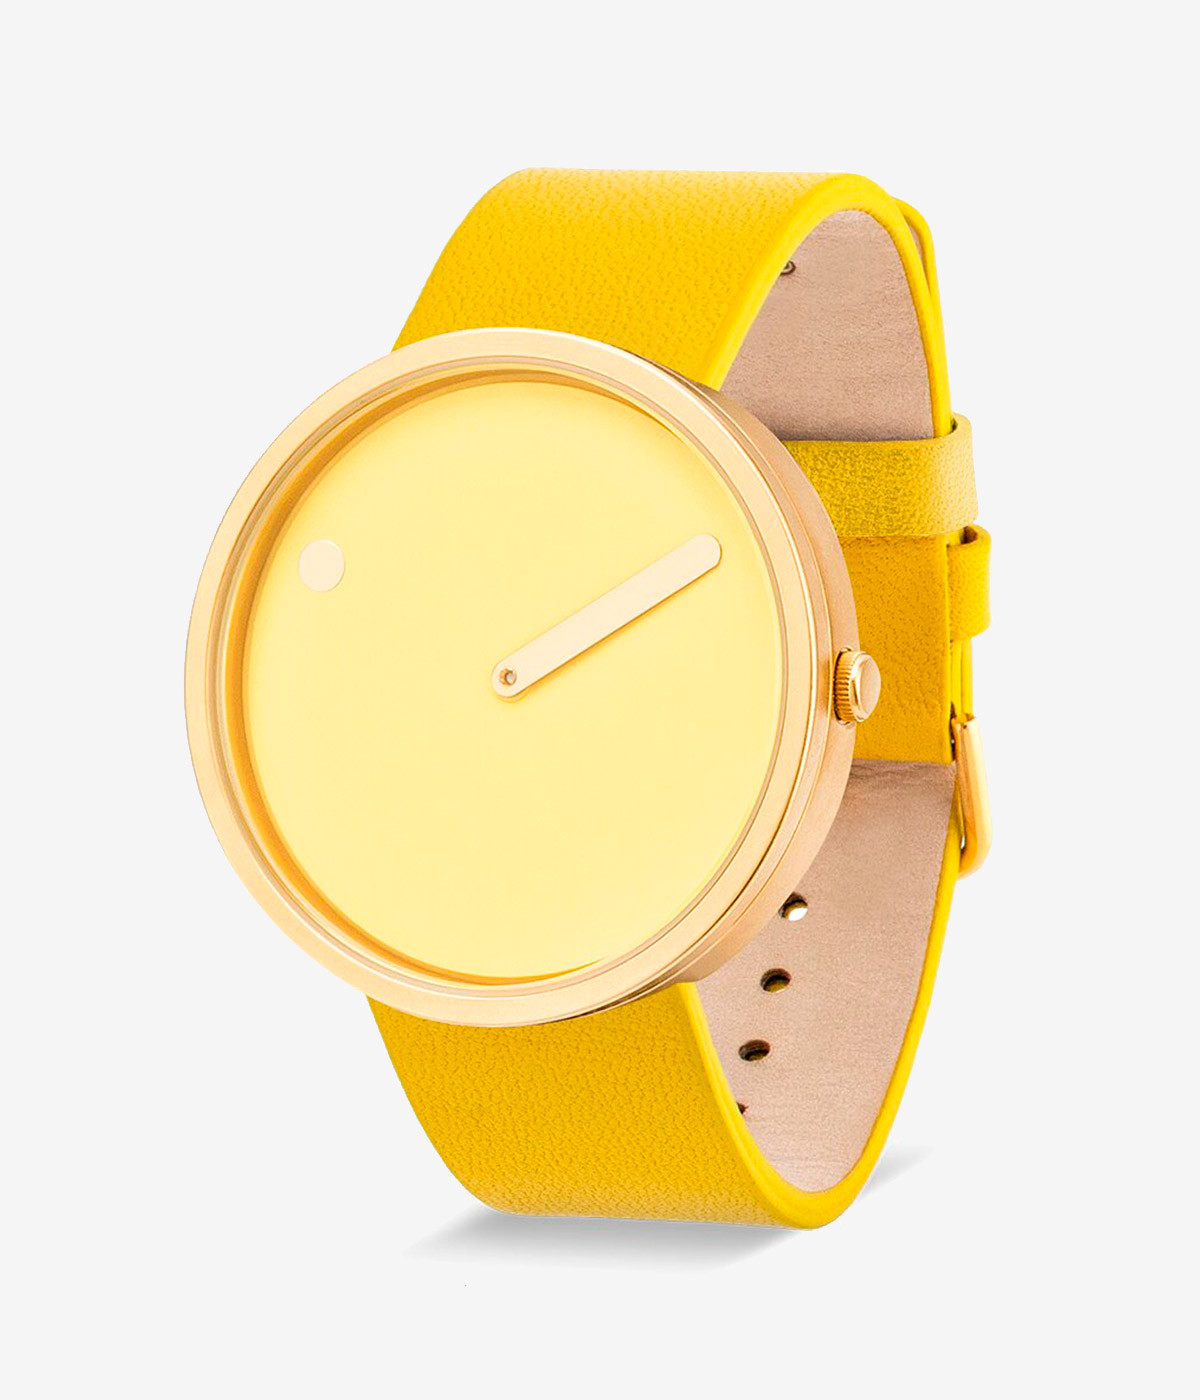 YELLOW DIAL / YELLOW LEATHER STRAP 40 MM